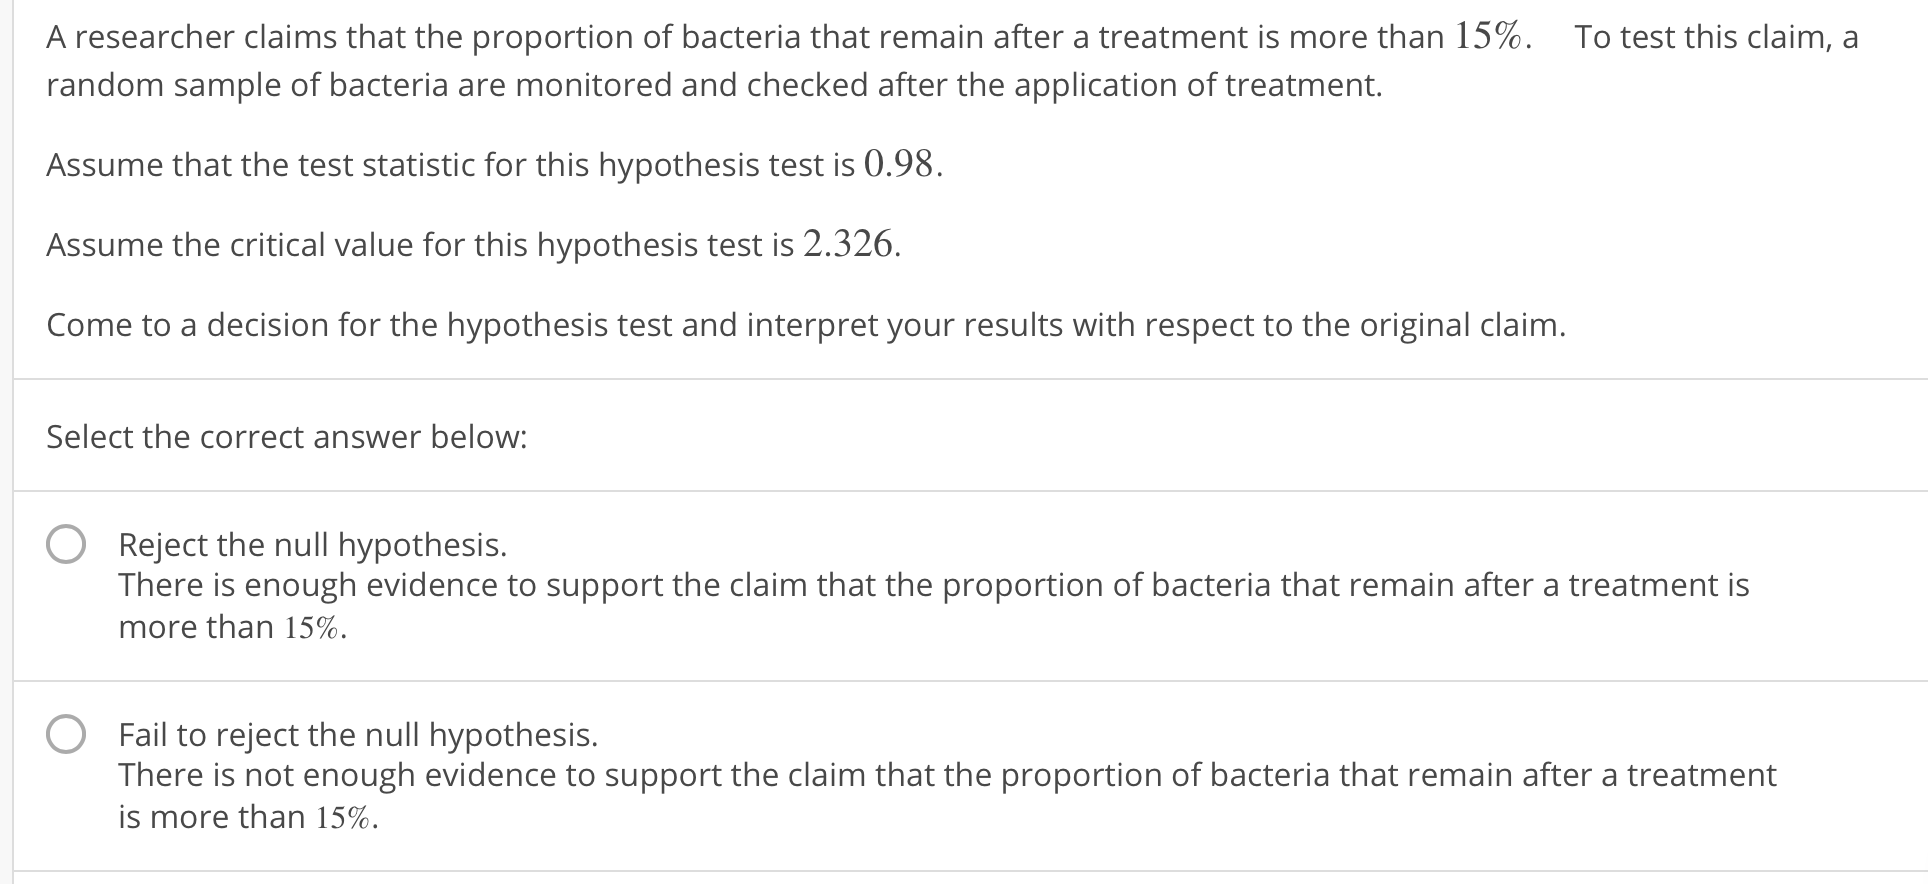 A researcher claims that the proportion of bacteria that remain after a treatment is more than 15%.
To test this claim, a
random sample of bacteria are monitored and checked after the application of treatment.
Assume that the test statistic for this hypothesis test is 0.98.
Assume the critical value for this hypothesis test is 2.326.
Come to a decision for the hypothesis test and interpret your results with respect to the original claim.
Select the correct answer below:
O
Reject the null hypothesis.
There is enough evidence to support the claim that the proportion of bacteria that remain after a treatment is
more than 15%.
O
Fail to reject the null hypothesis.
There is not enough evidence to support the claim that the proportion of bacteria that remain after a treatment
is more than 15%.
